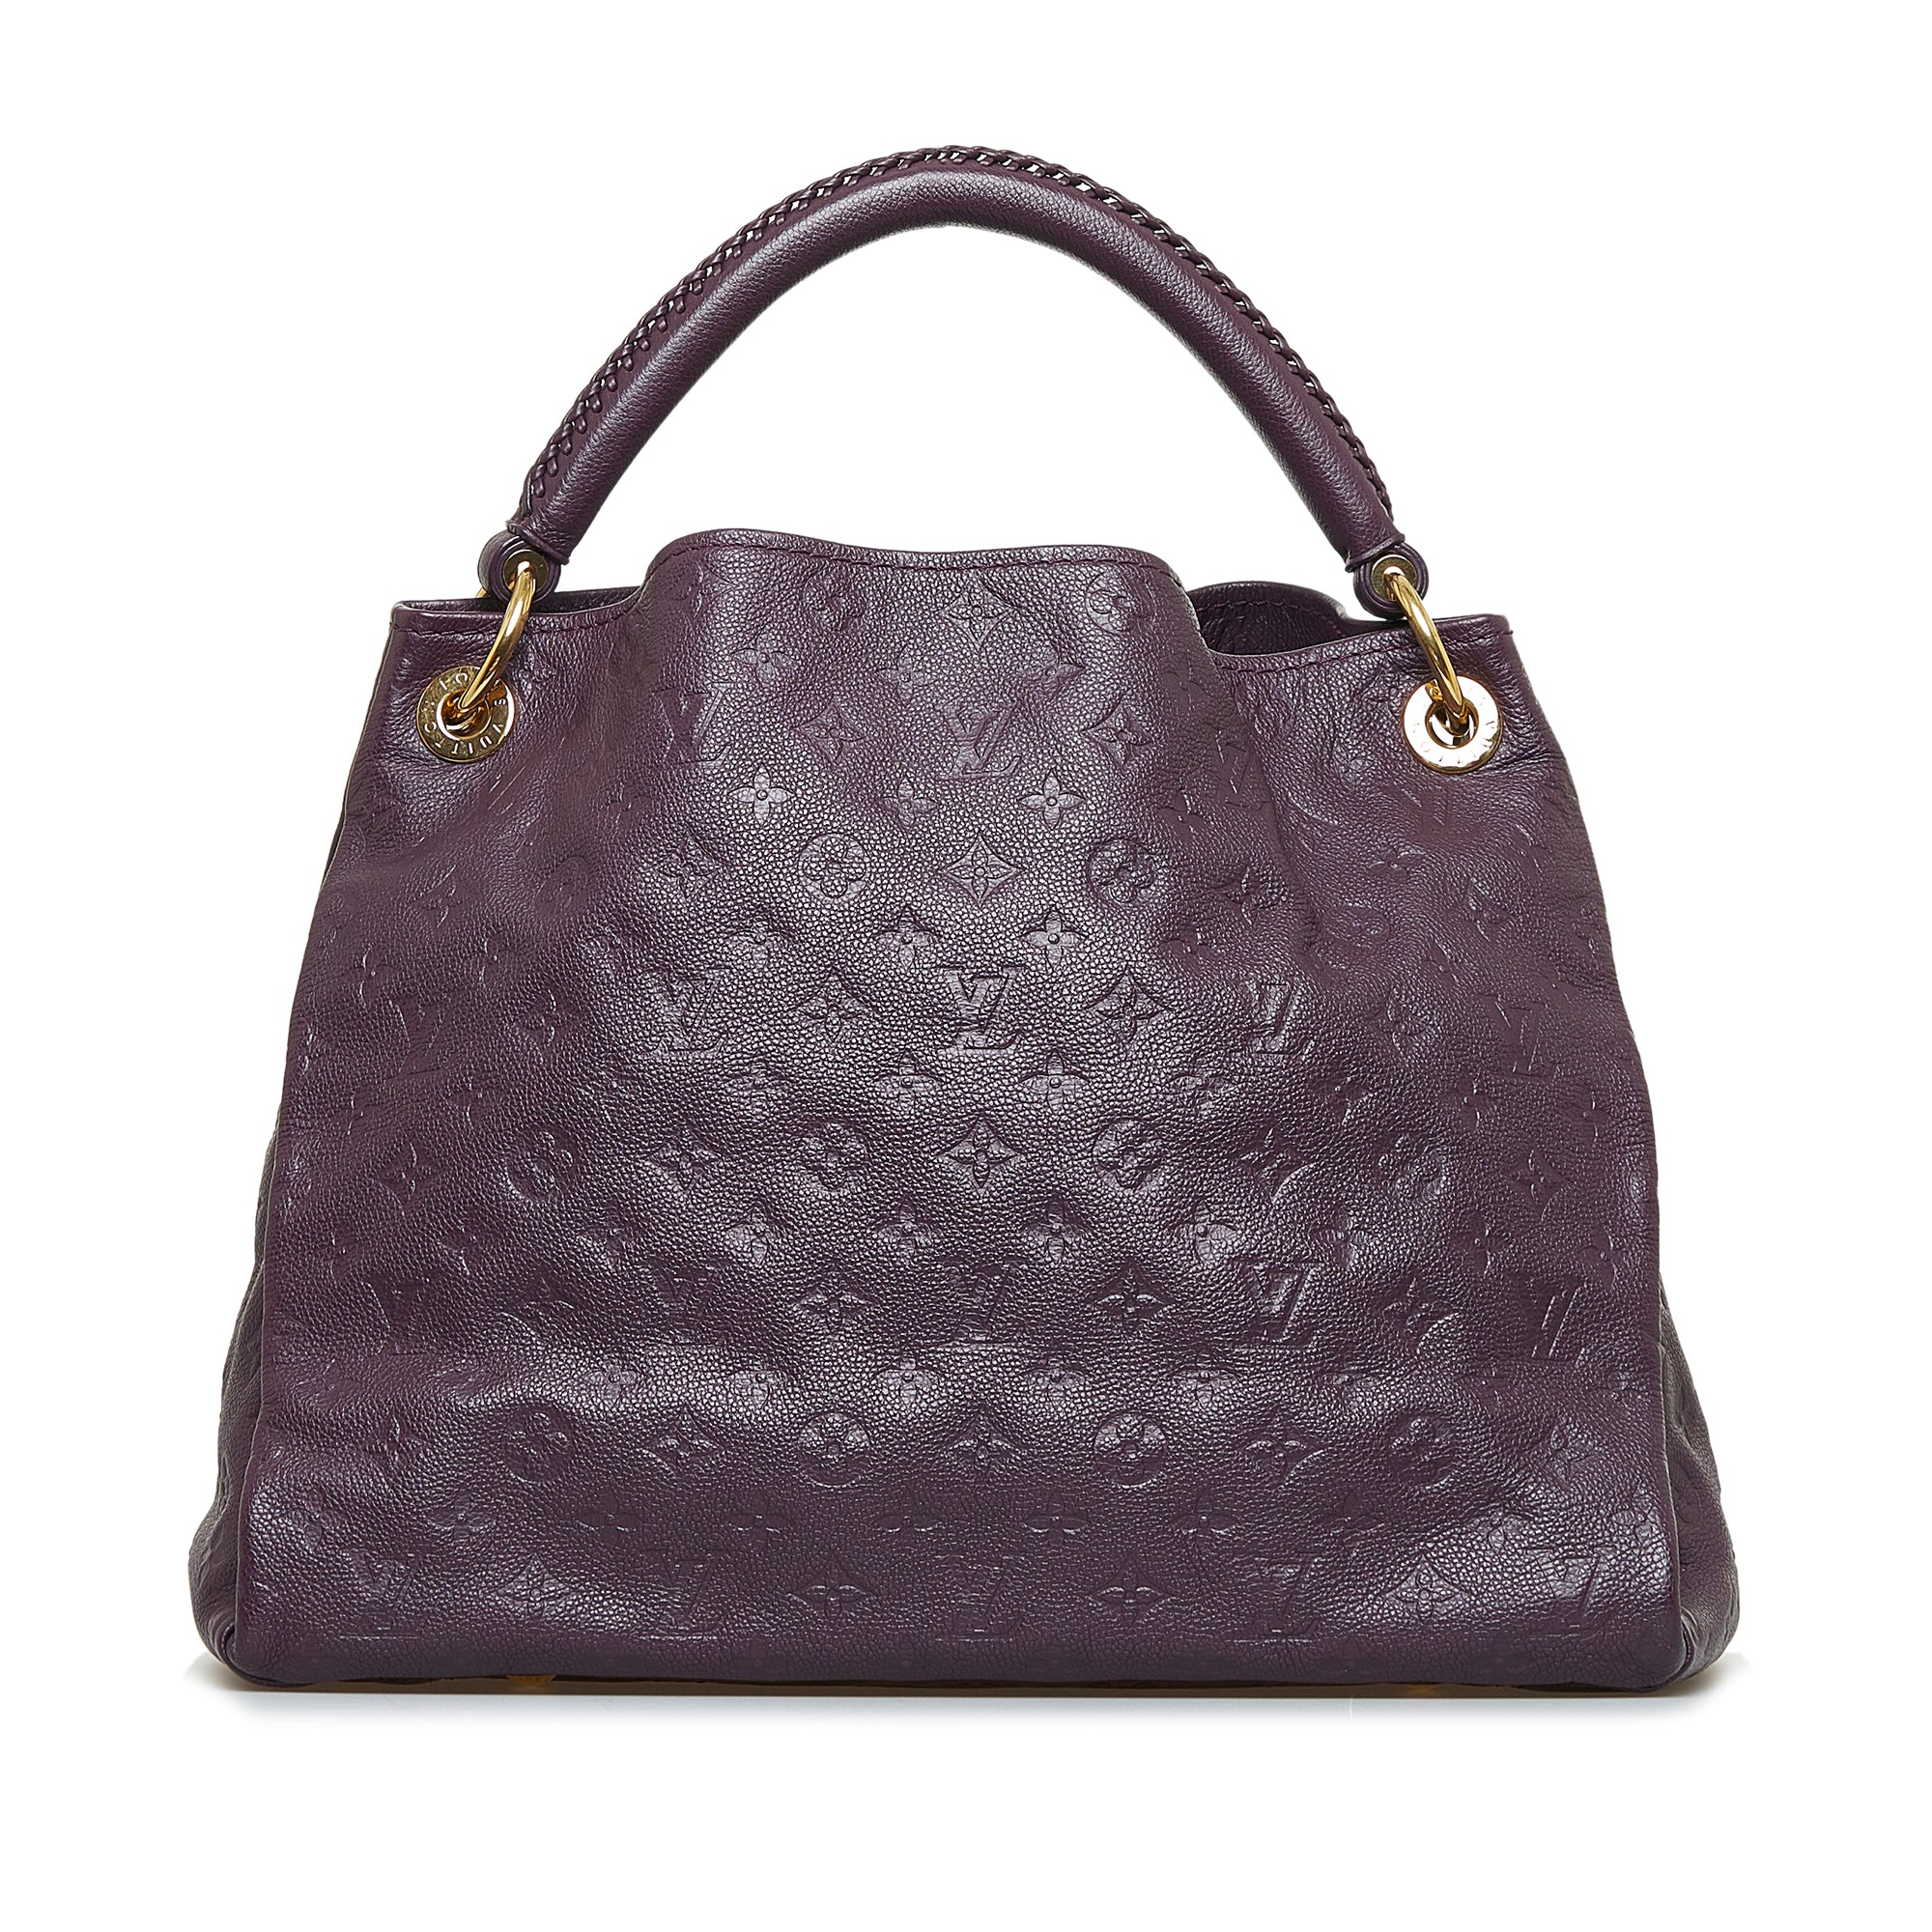 Louis Vuitton Artsy MM Limited Edition in Raspberry Red - Lilac Blue London